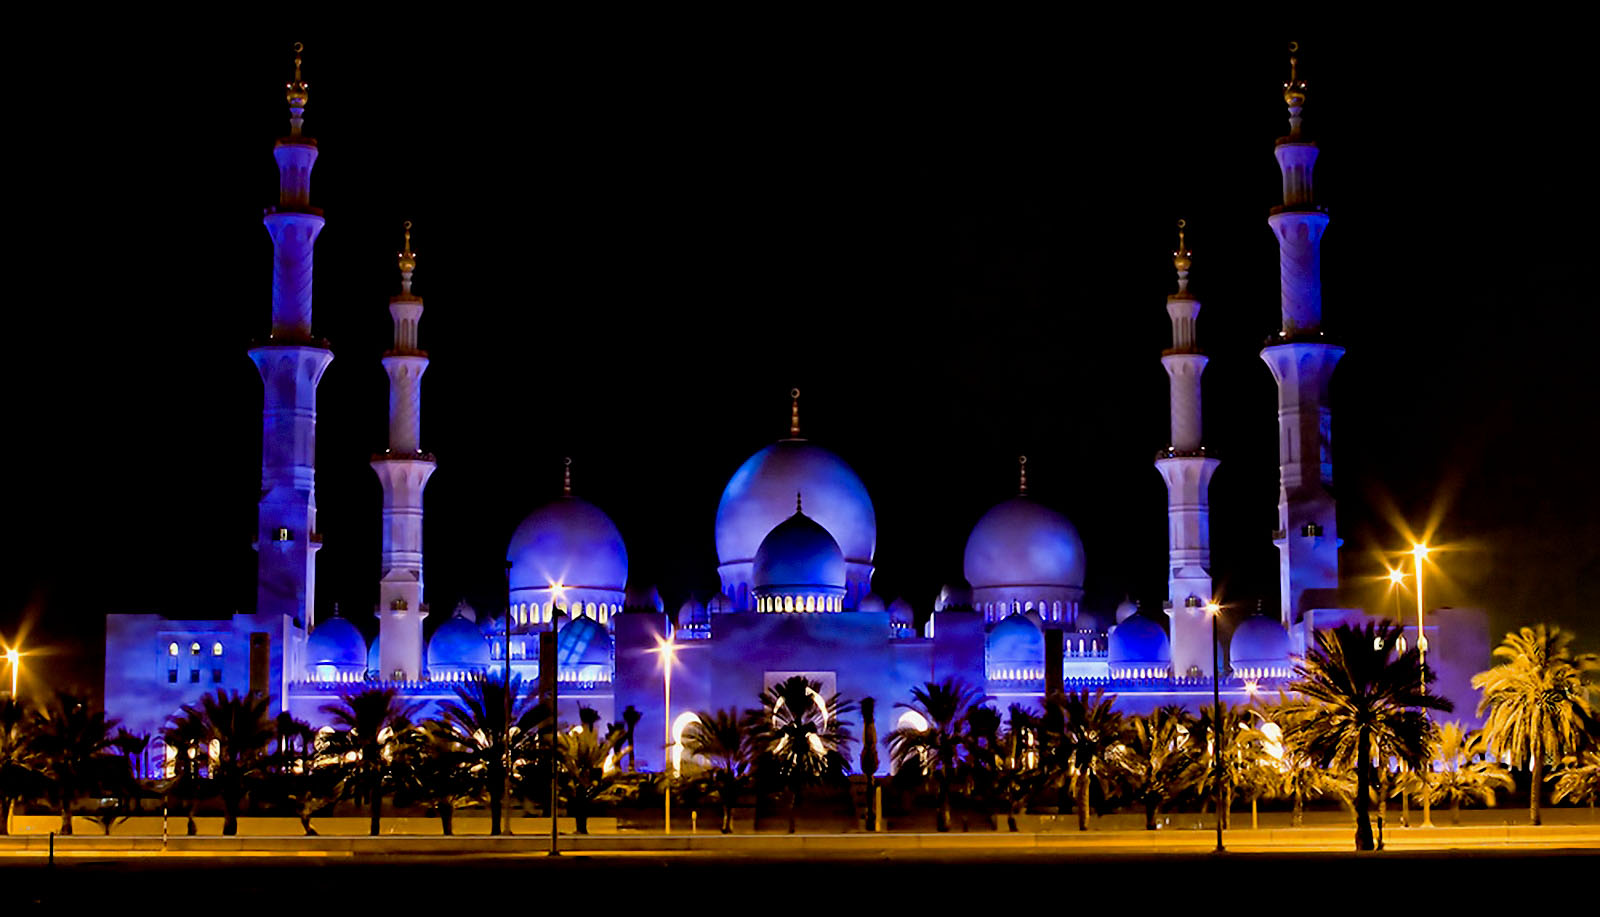 islamic thems: Sheikh Zayed Mosque at night